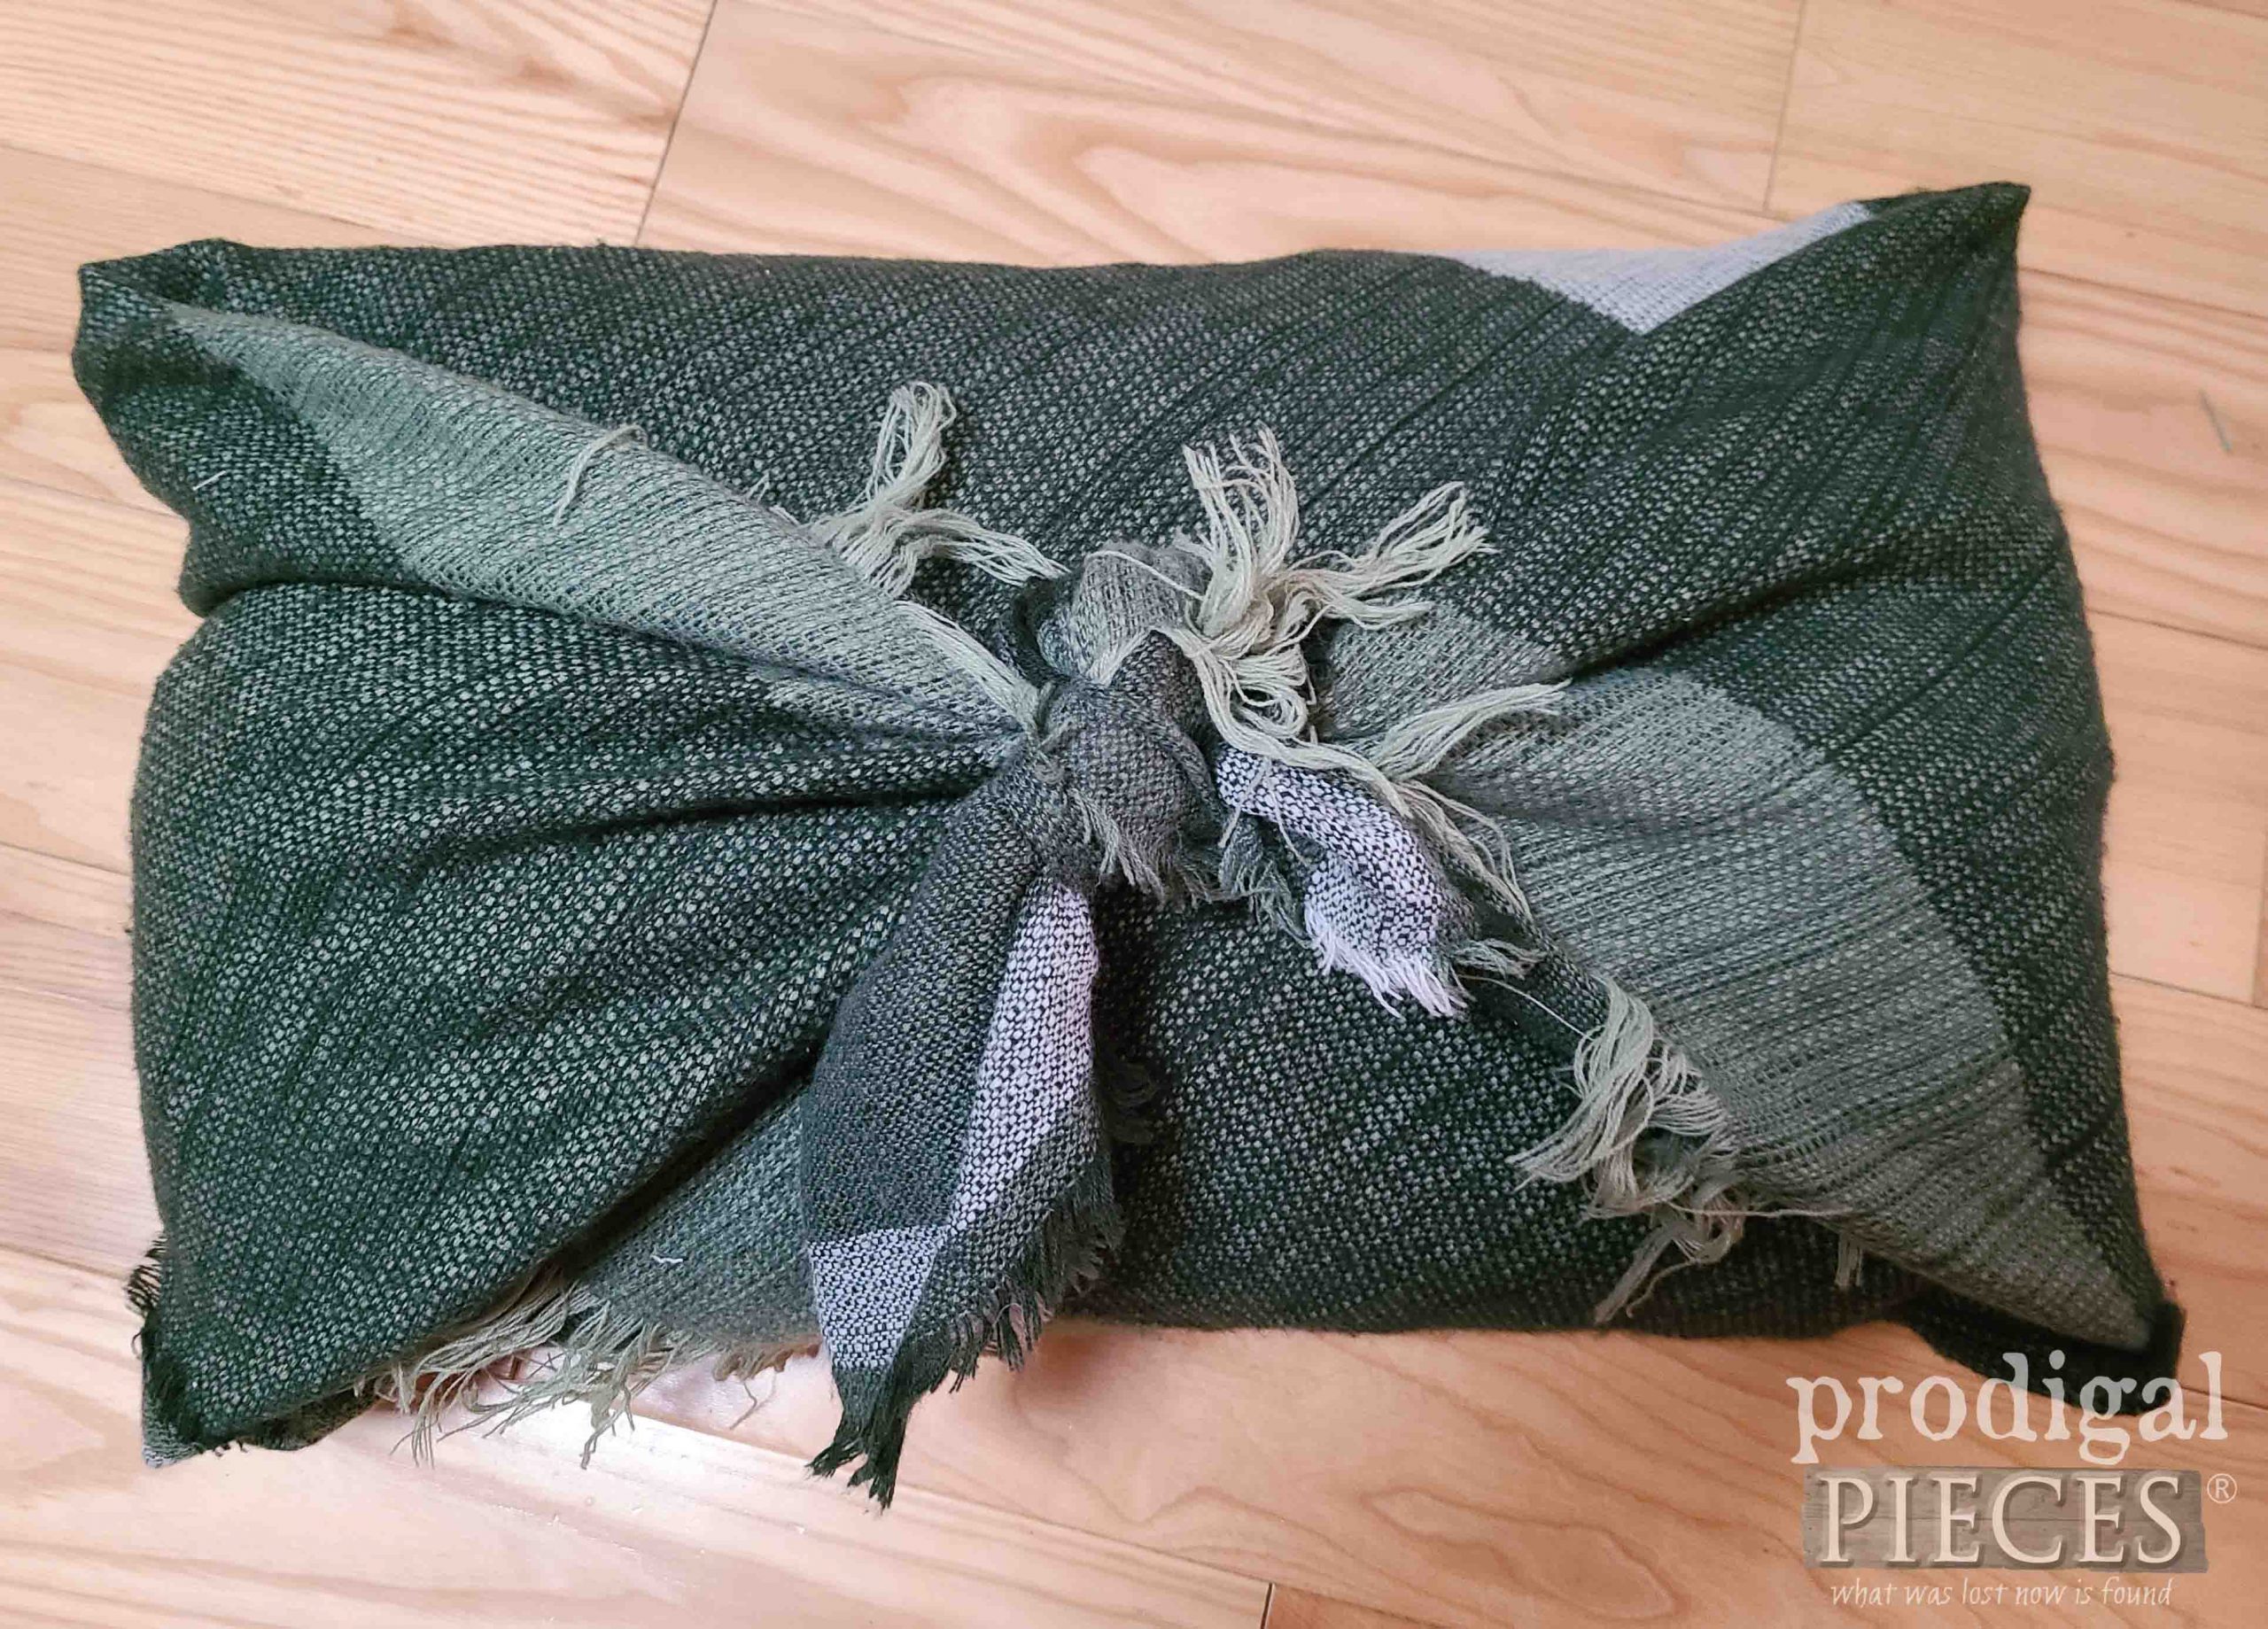 Creating Christmas Decor with an Upcycled Scarves Pillow | prodigalpieces.com